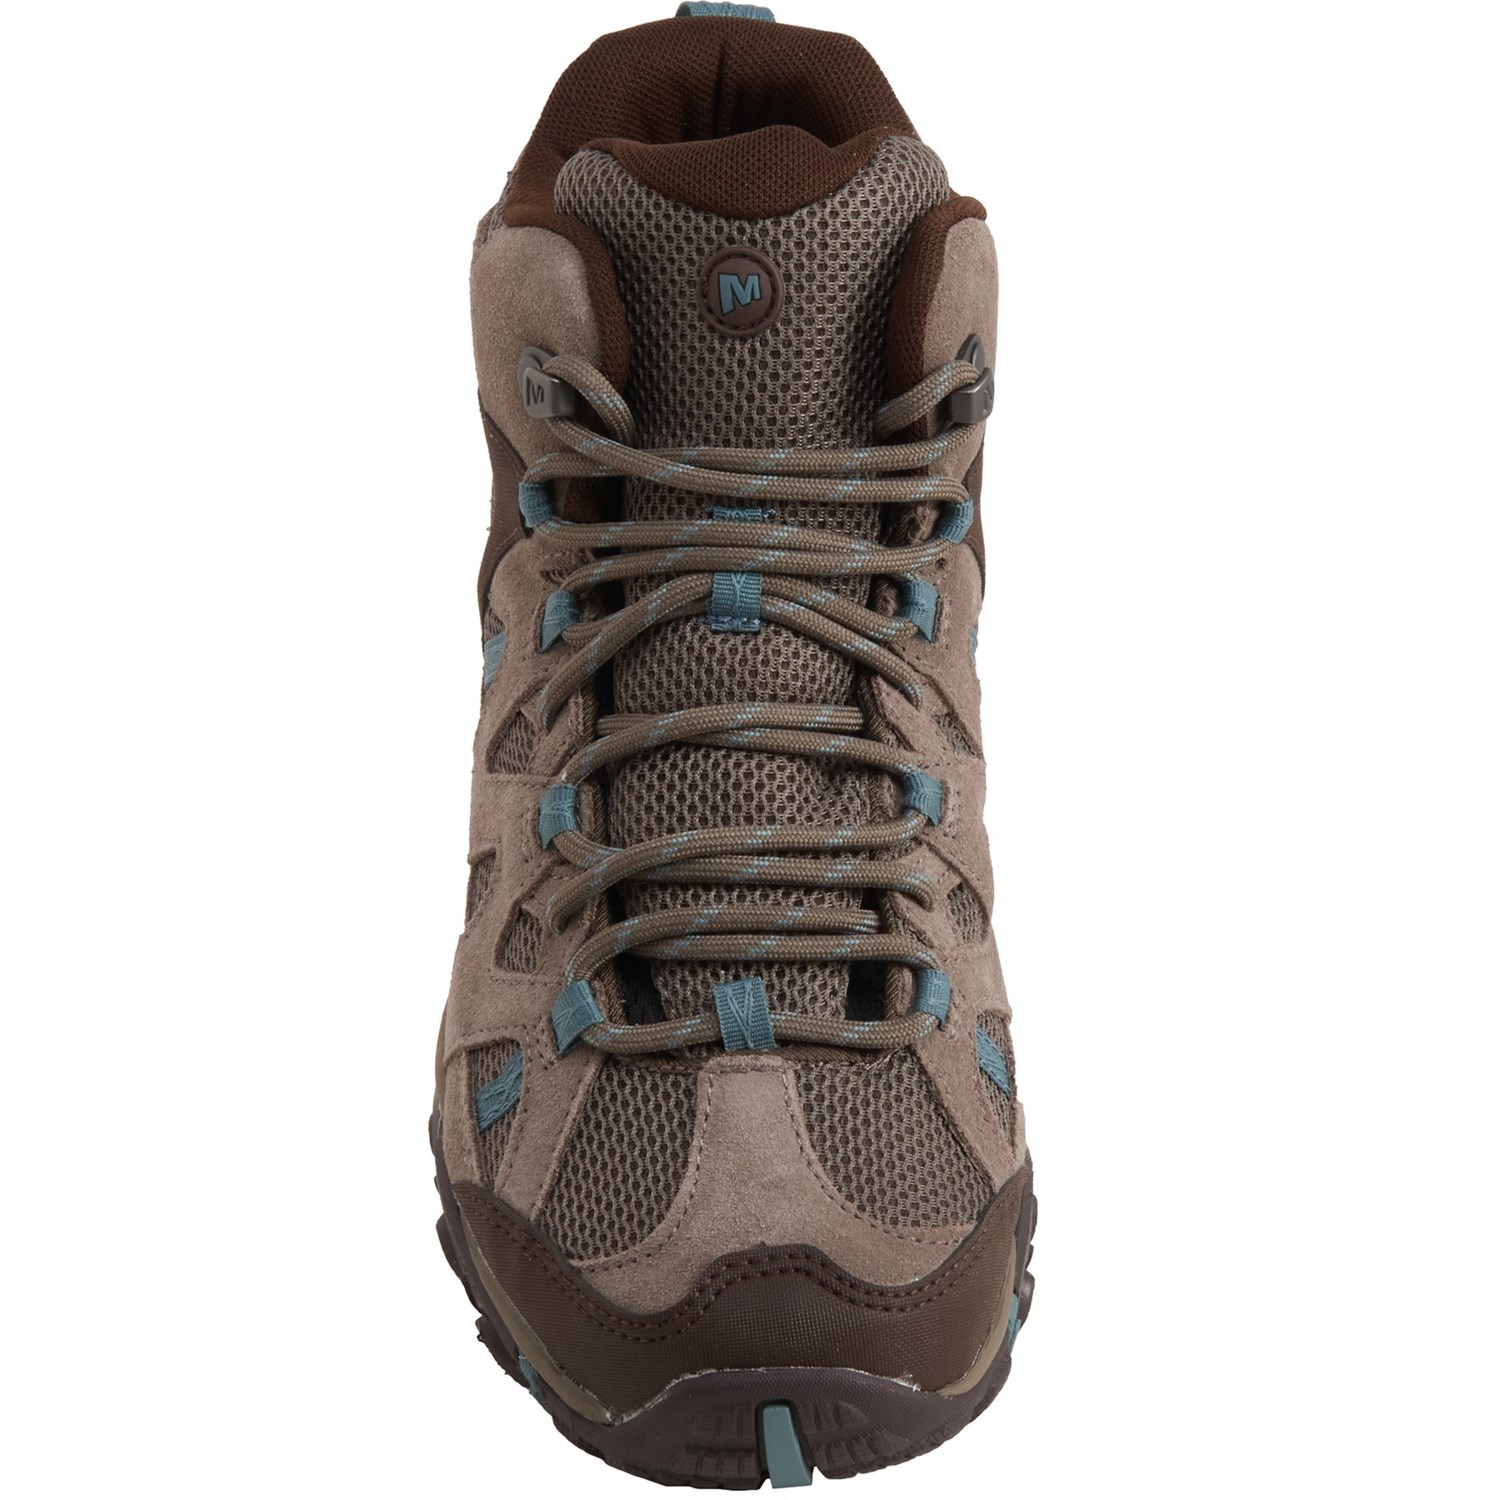 Merrell Deverta 2 Mid Hiking Boots (For Women) - Save 30%